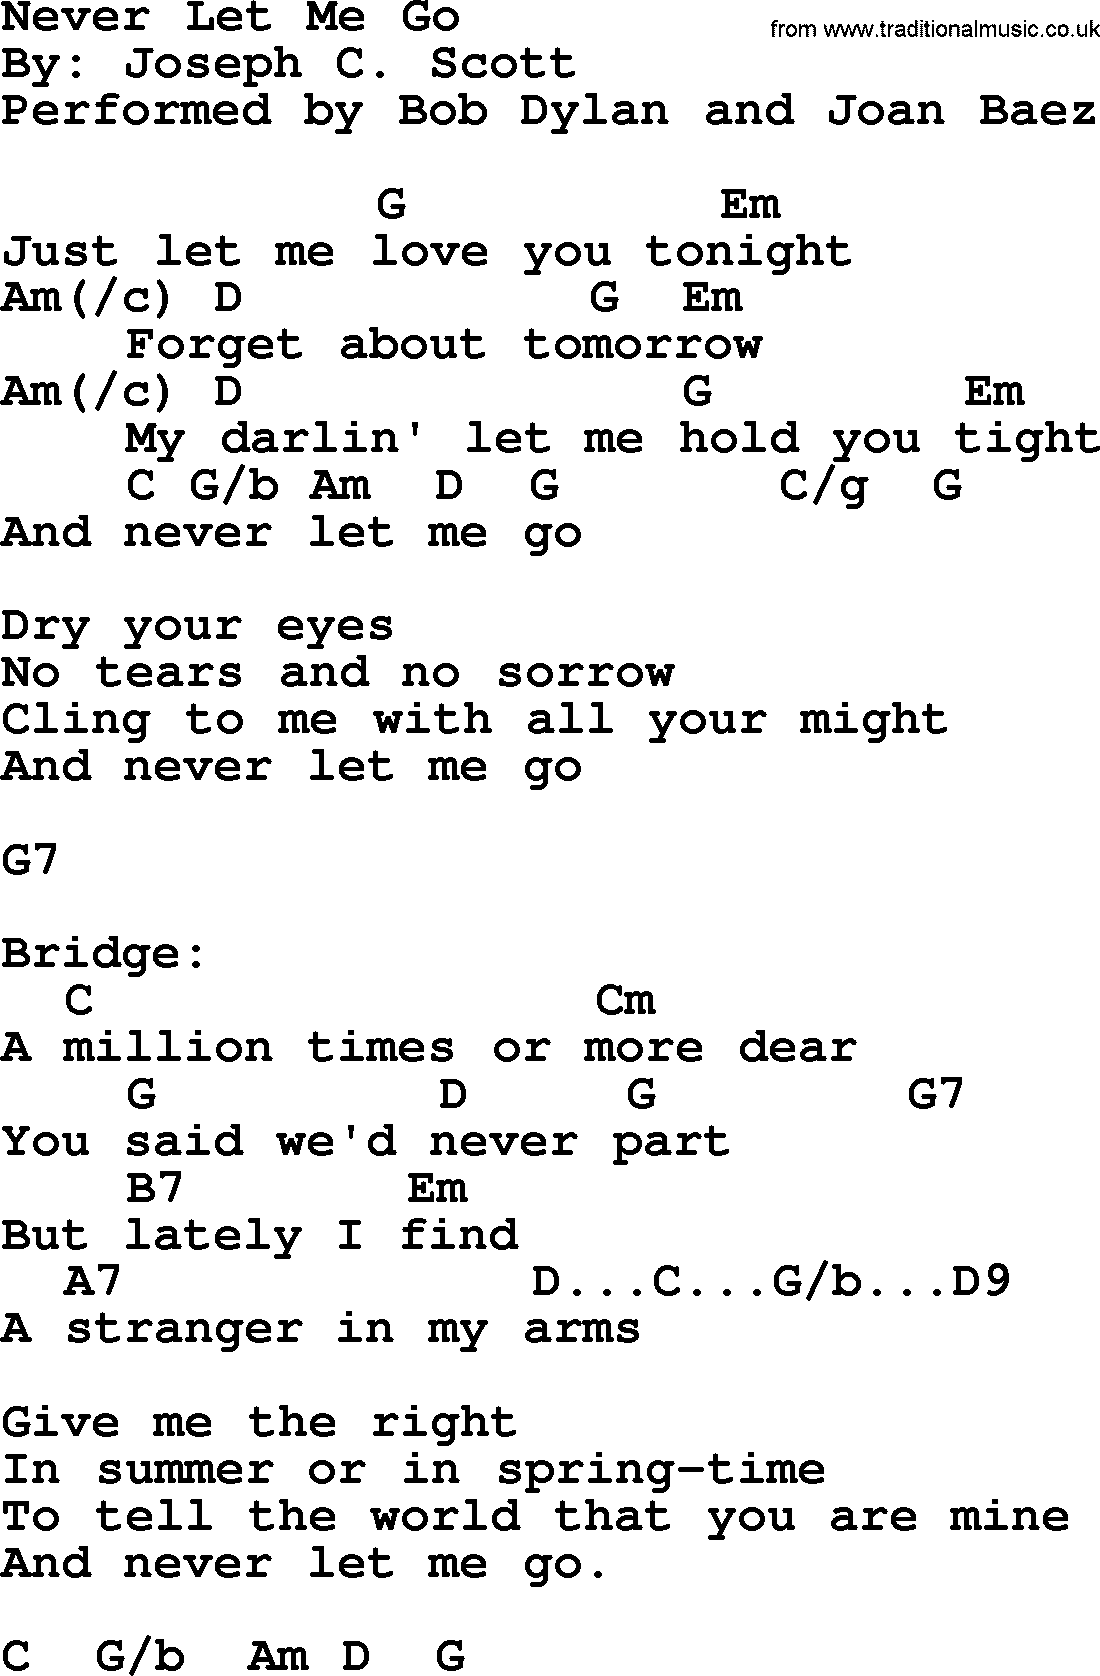 Bob Dylan song, lyrics with chords - Never Let Me Go